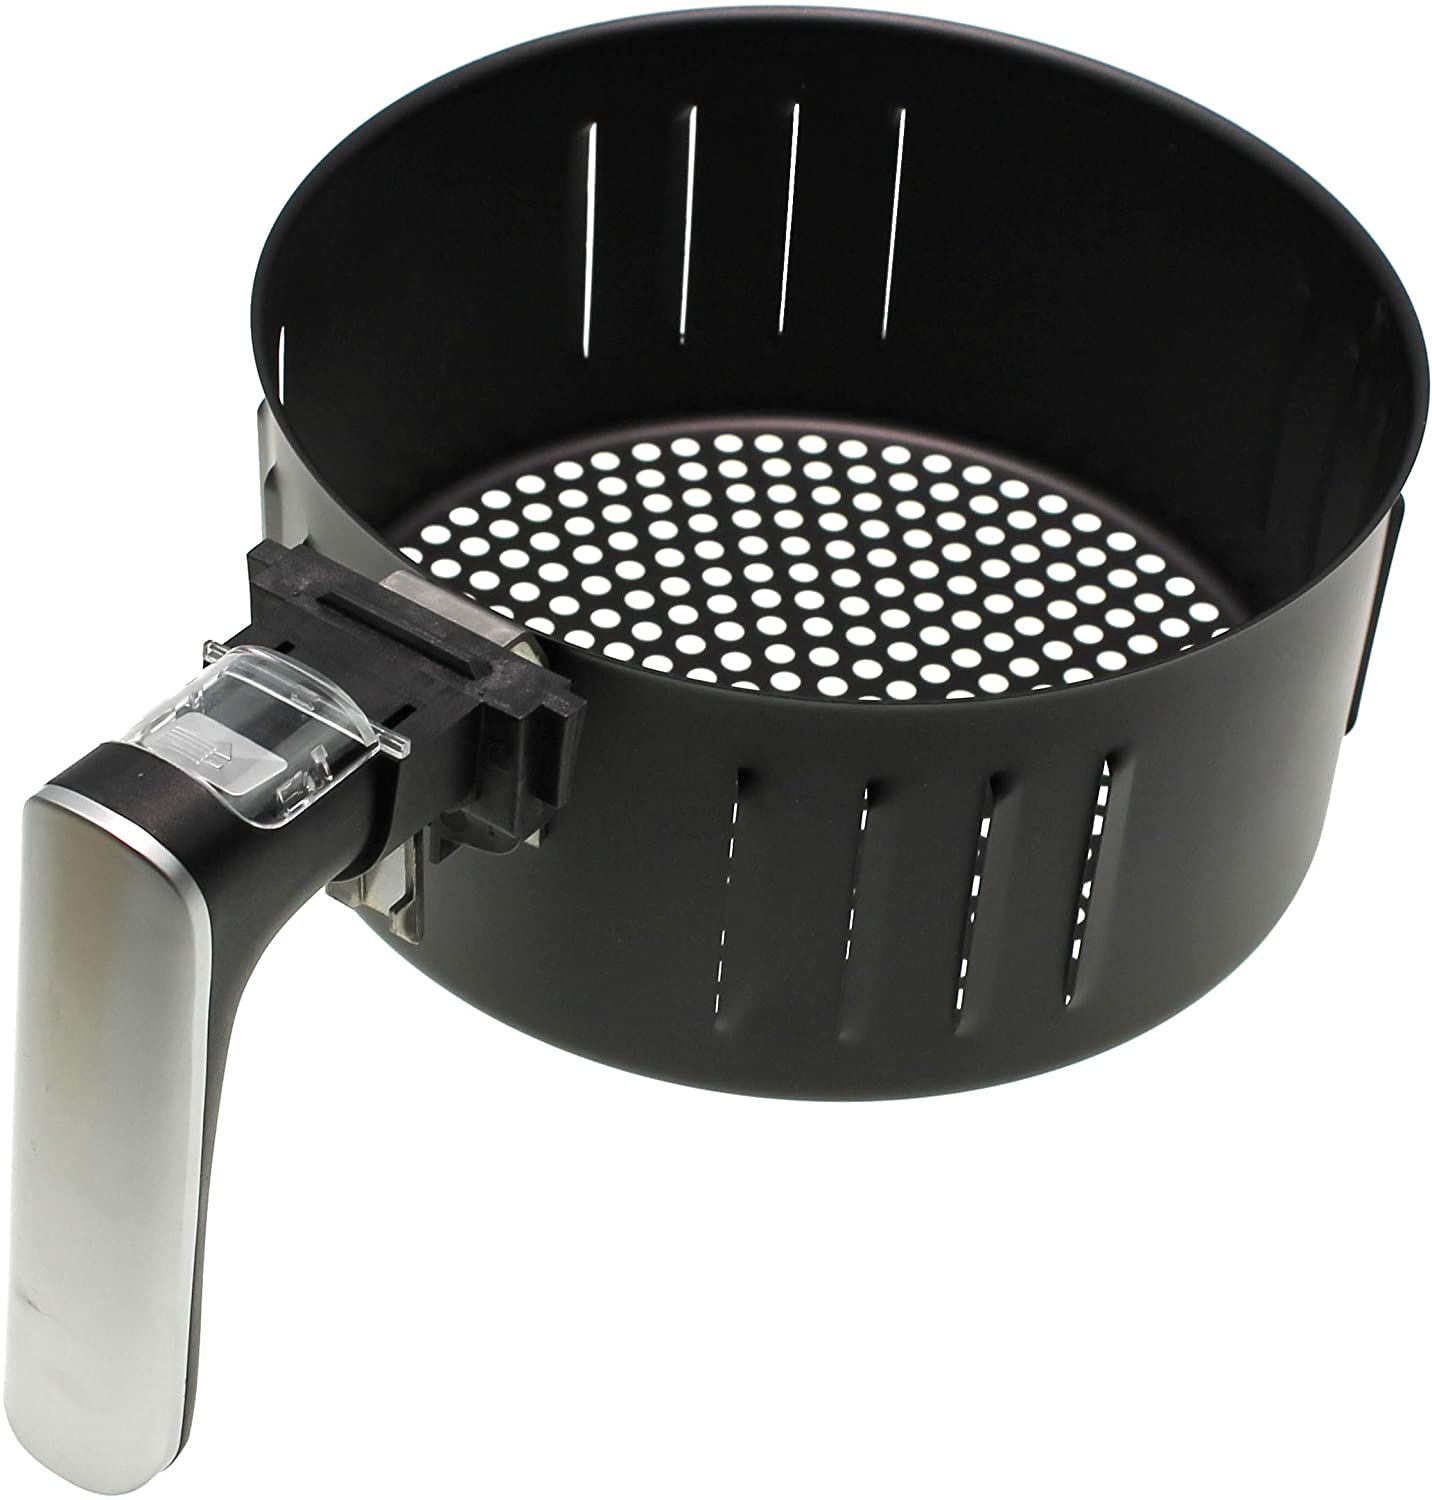 Basket 0480048 only / exclusively compatible with/spare part for Severin FR2430 hot air fryer